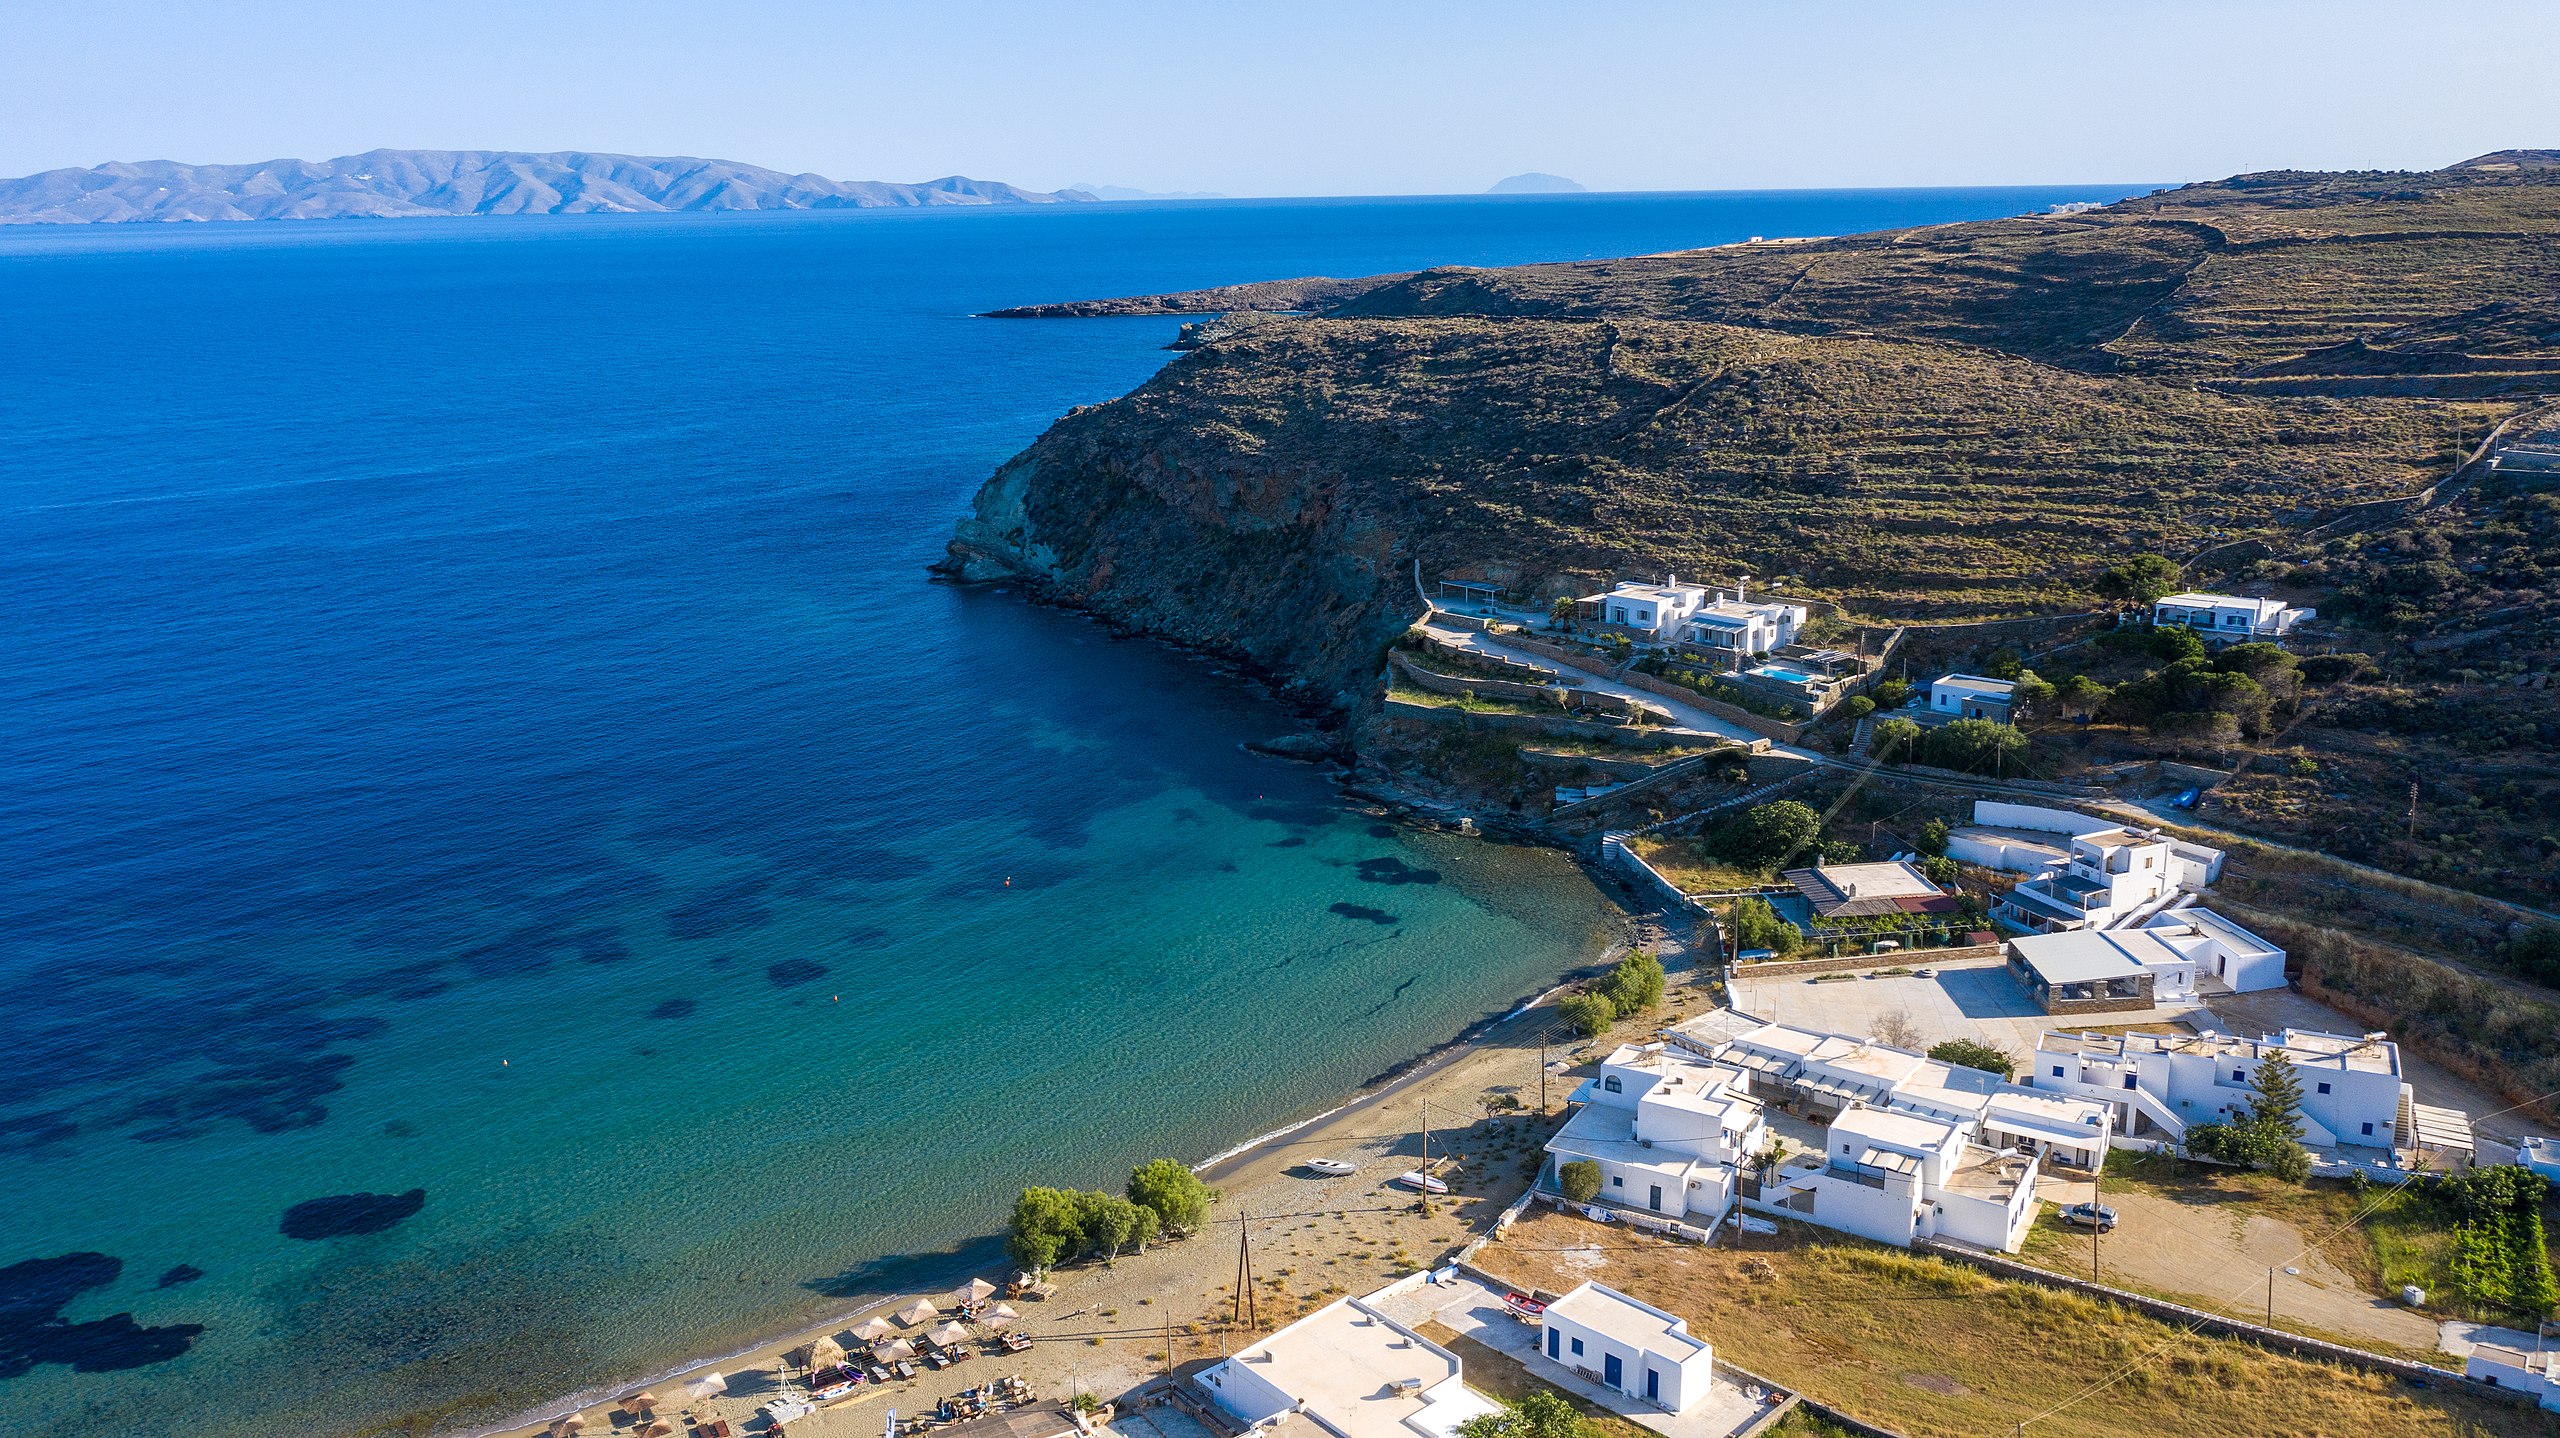 <p>There are over 6,000 islands in Greece. Some, like Mykonos or Santorini, are extremely popular—but there are dozens of hidden gem islands like Kythnos, Kea, and Folegandros that offer spectacular views without the crowds.</p>